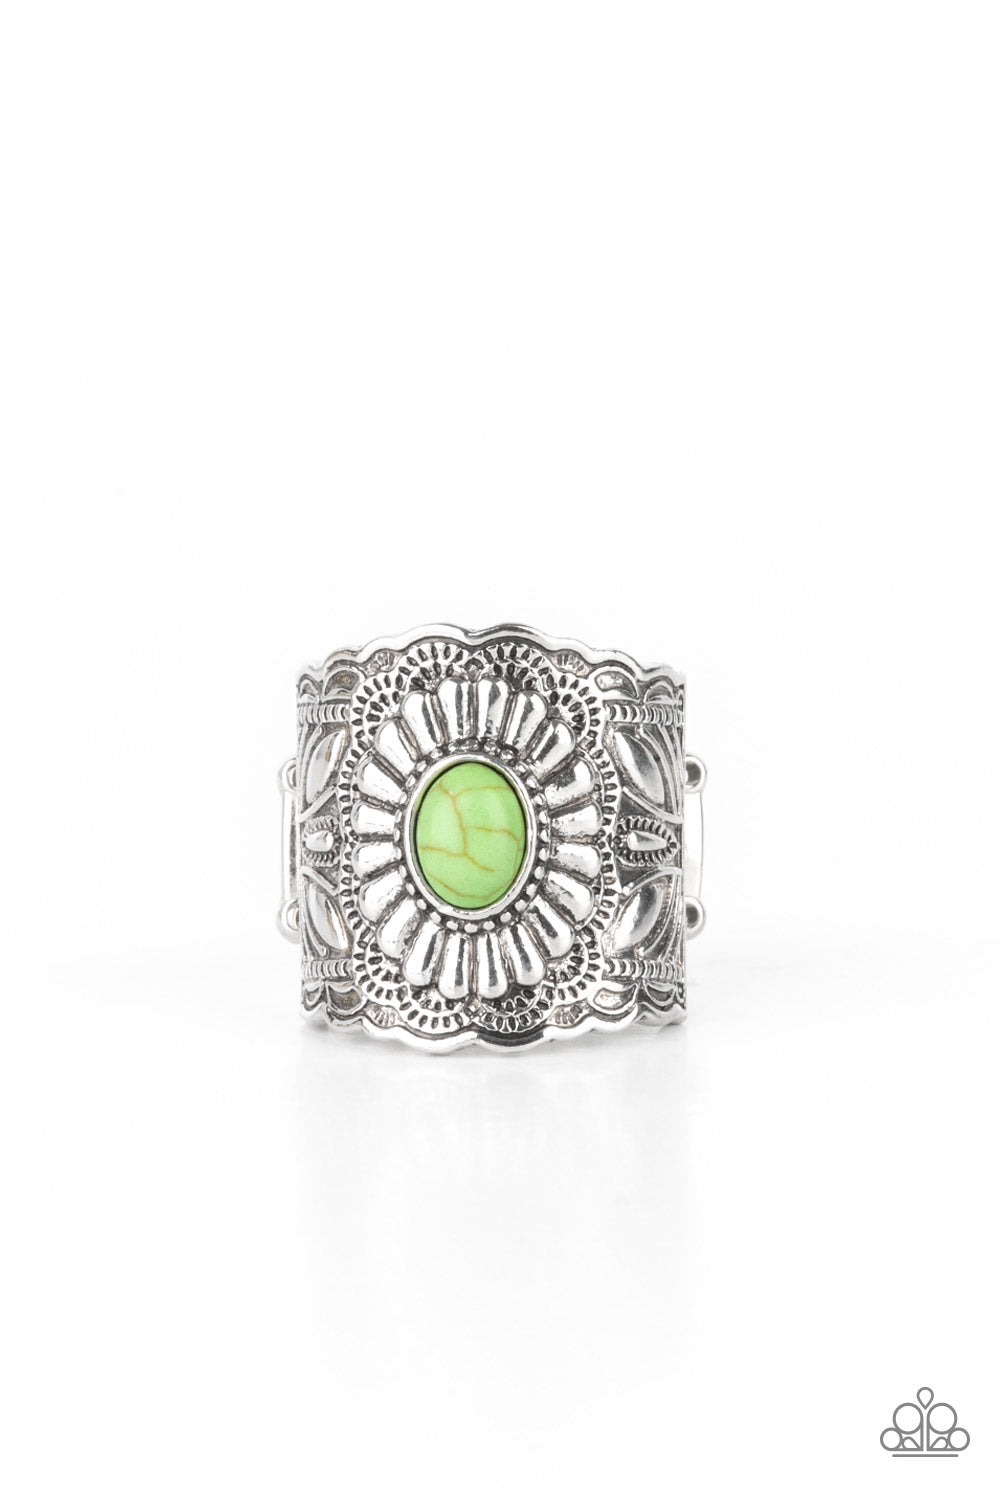 Paparazzi ring - Exquisitely Ornamental - Green